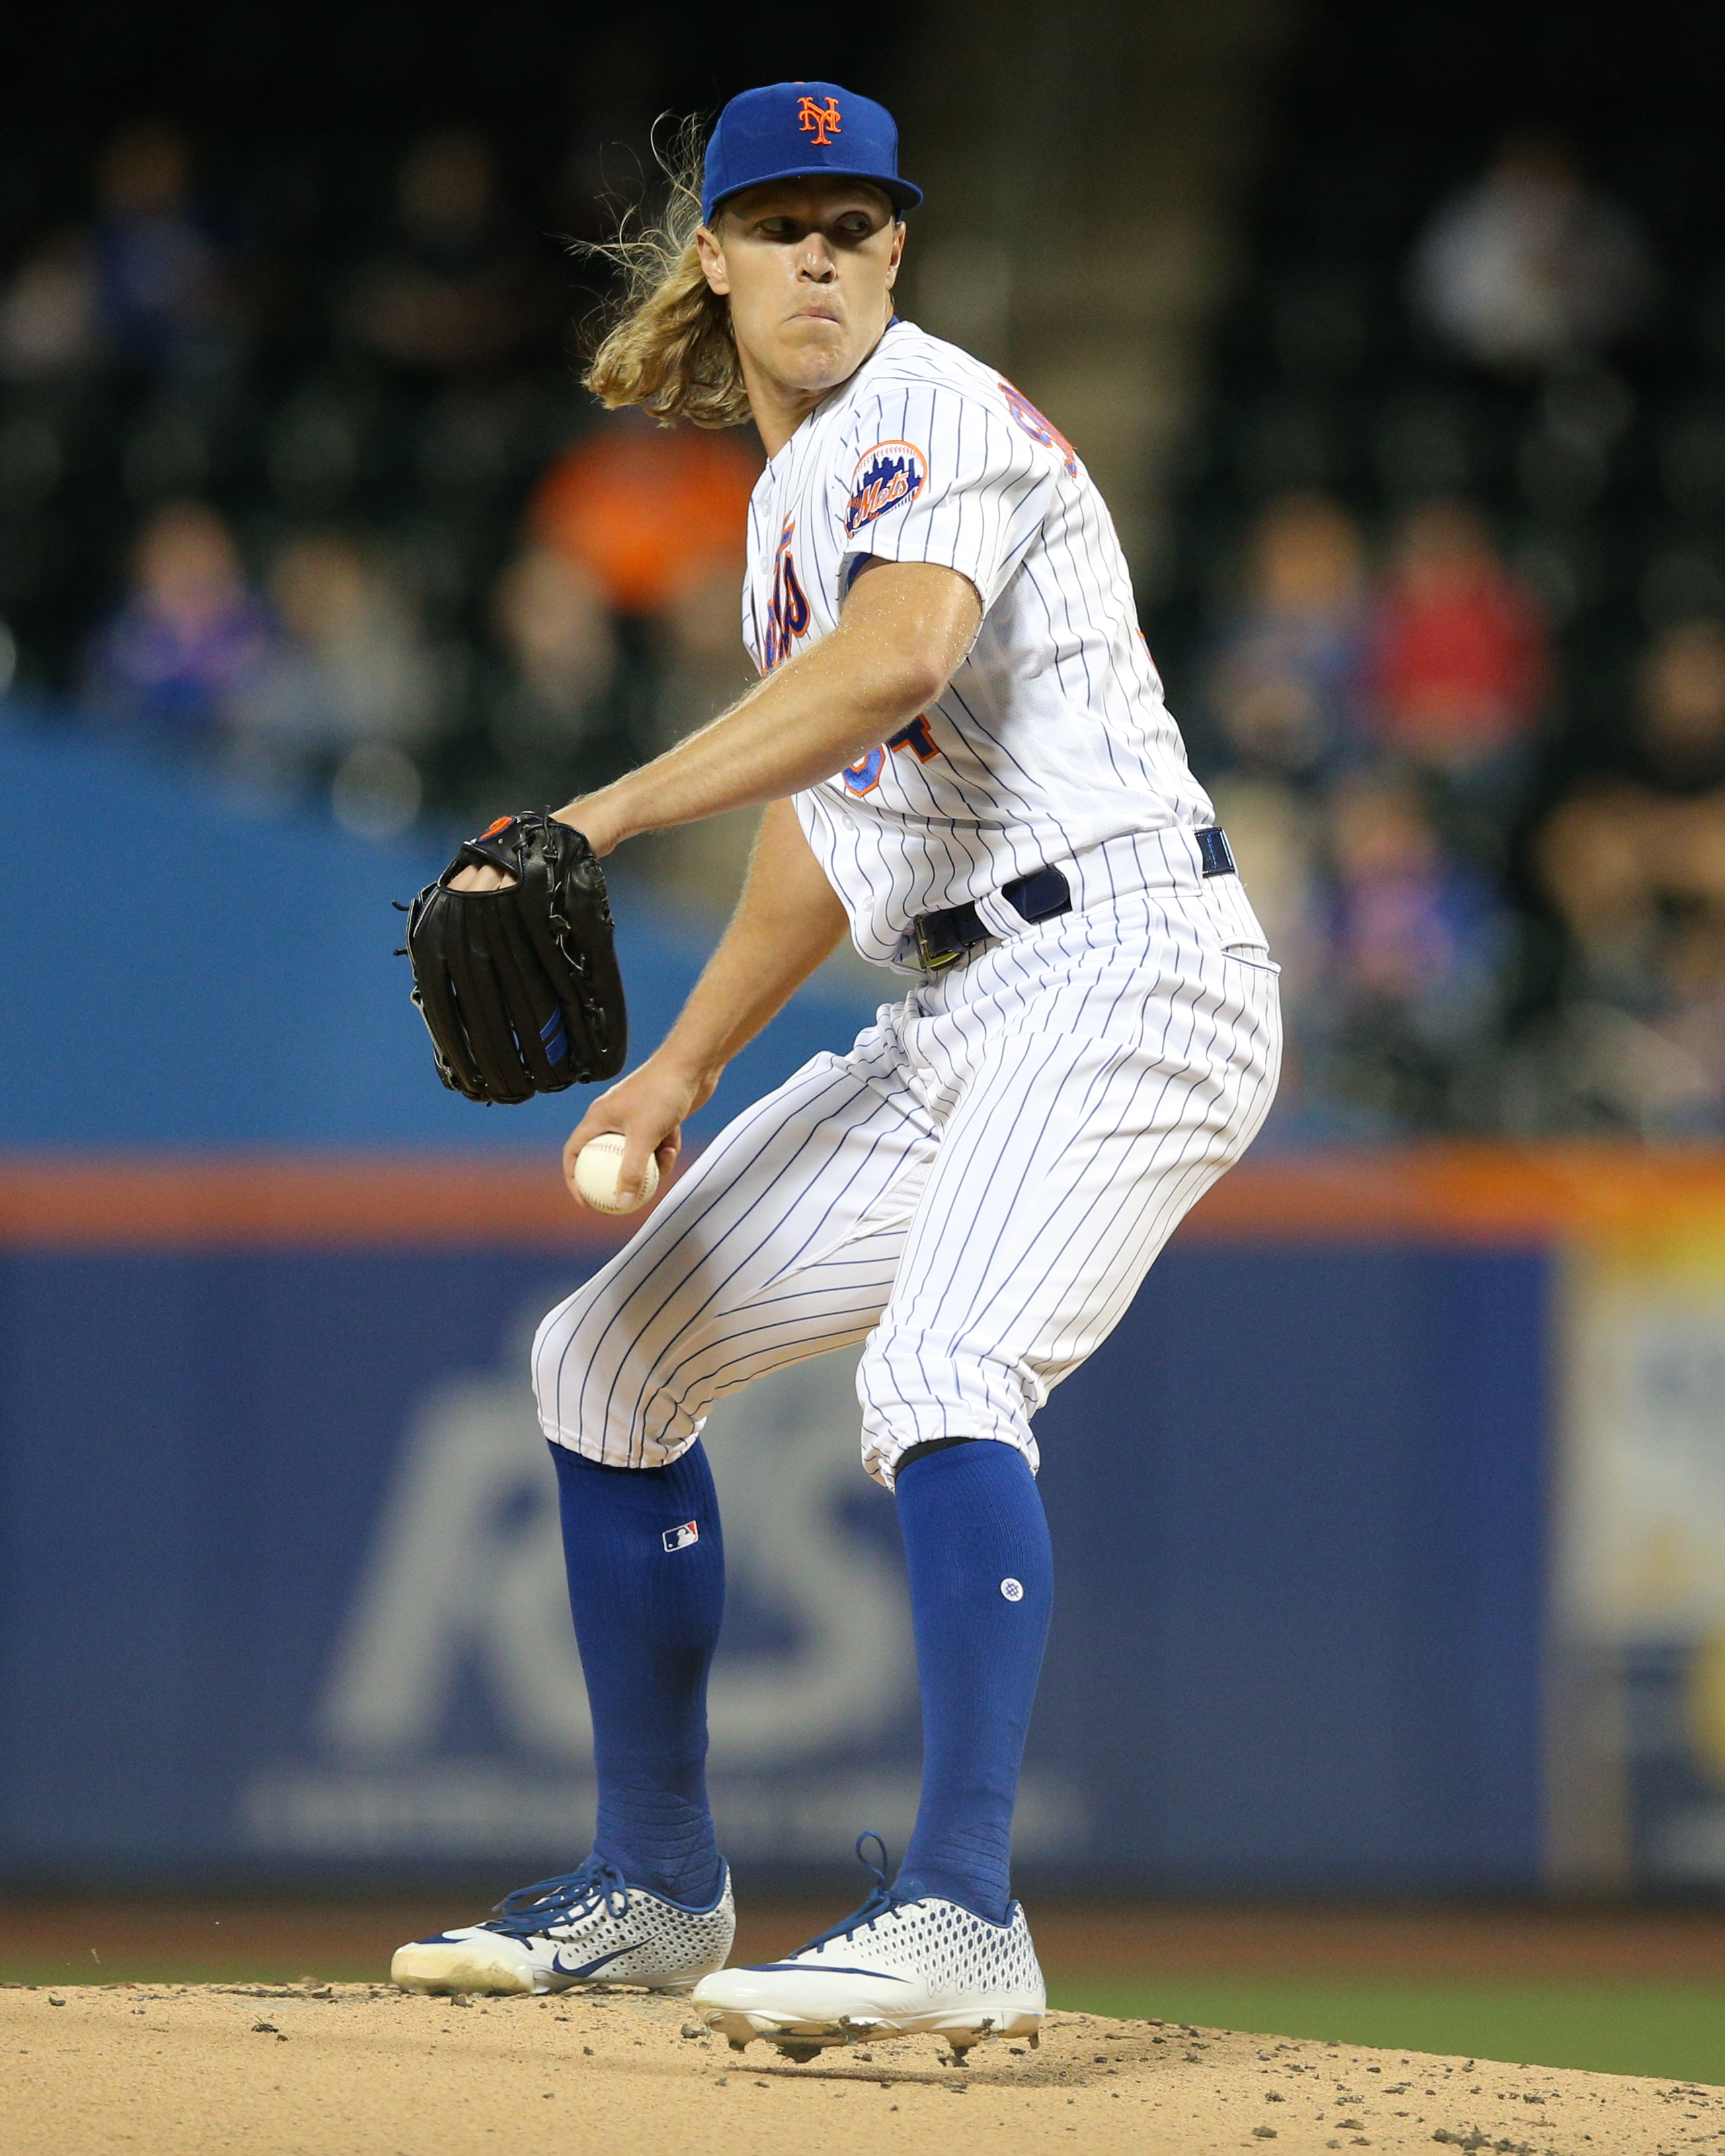 Jacob deGrom spurned Mets' three-year deal in $120 million range